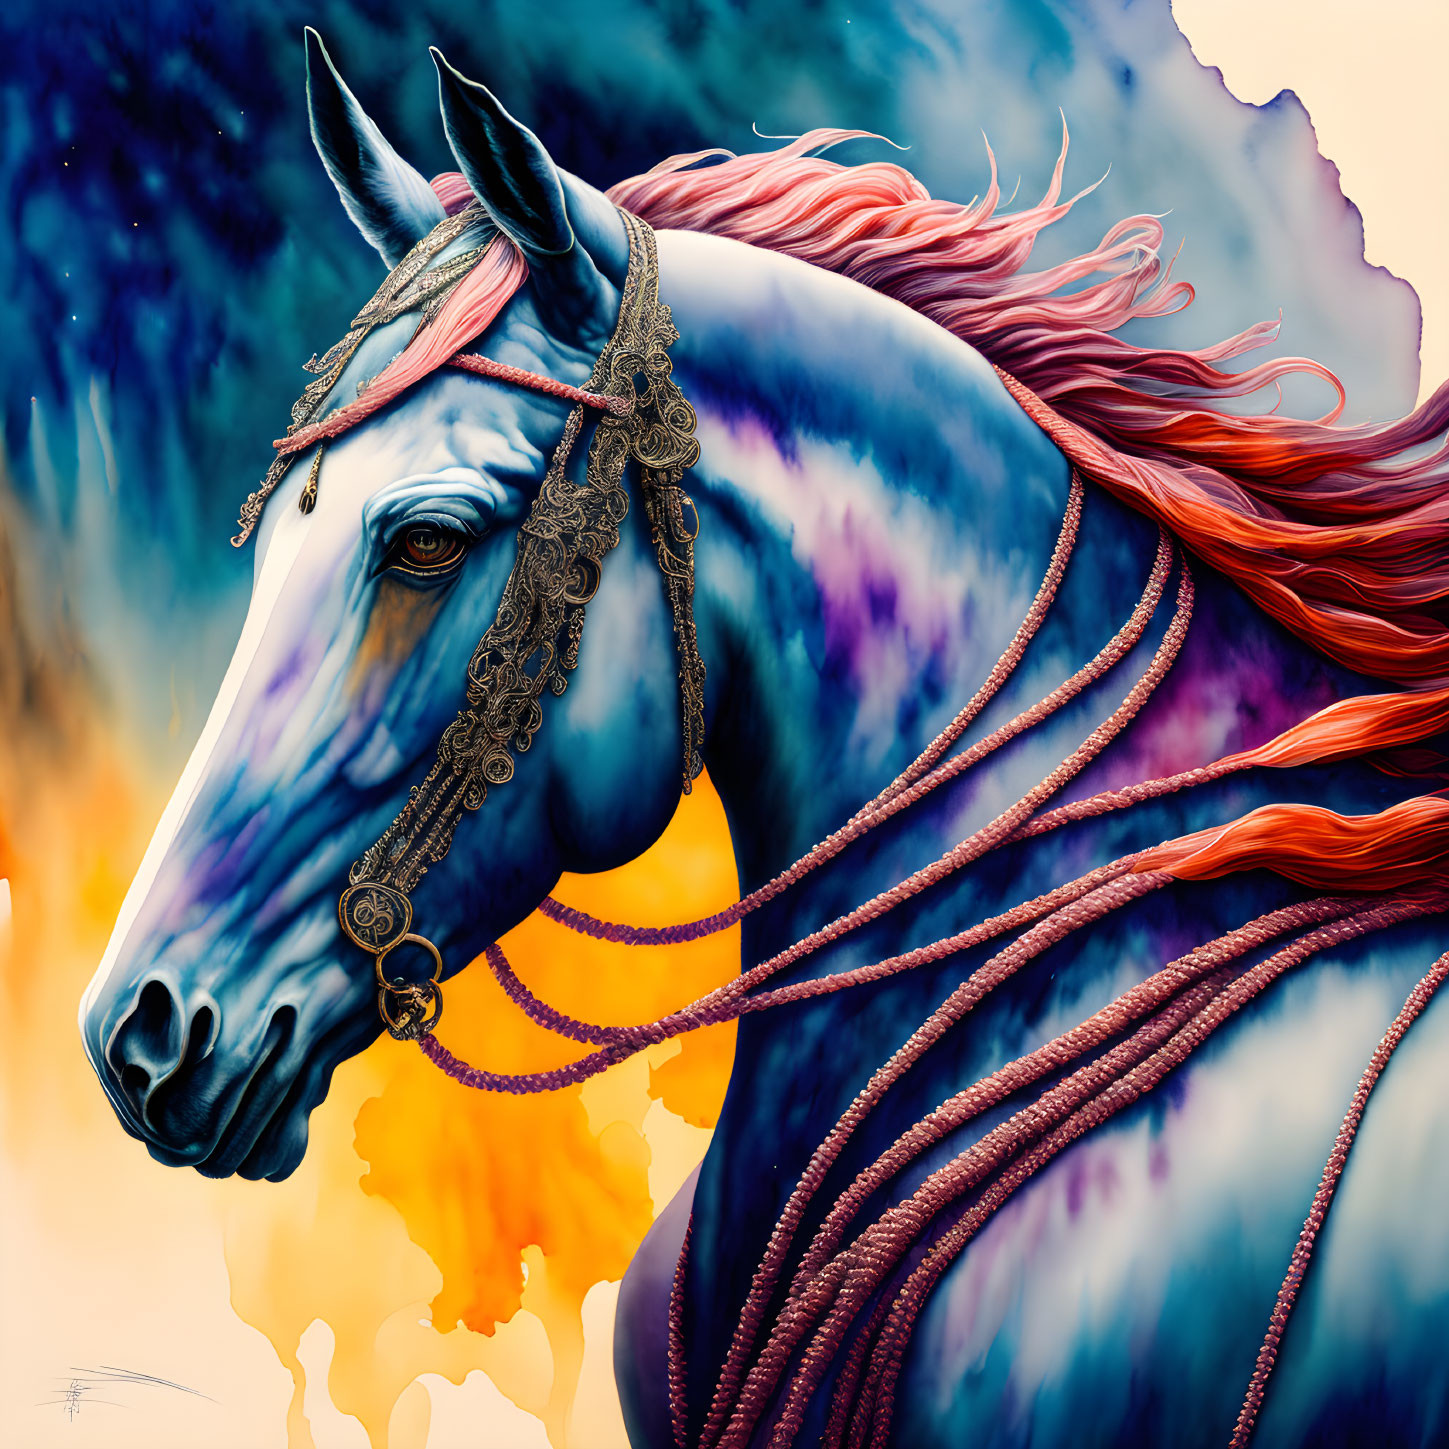 Colorful Horse Artwork: Blue and Purple Horse with Gold Jewelry on Abstract Background